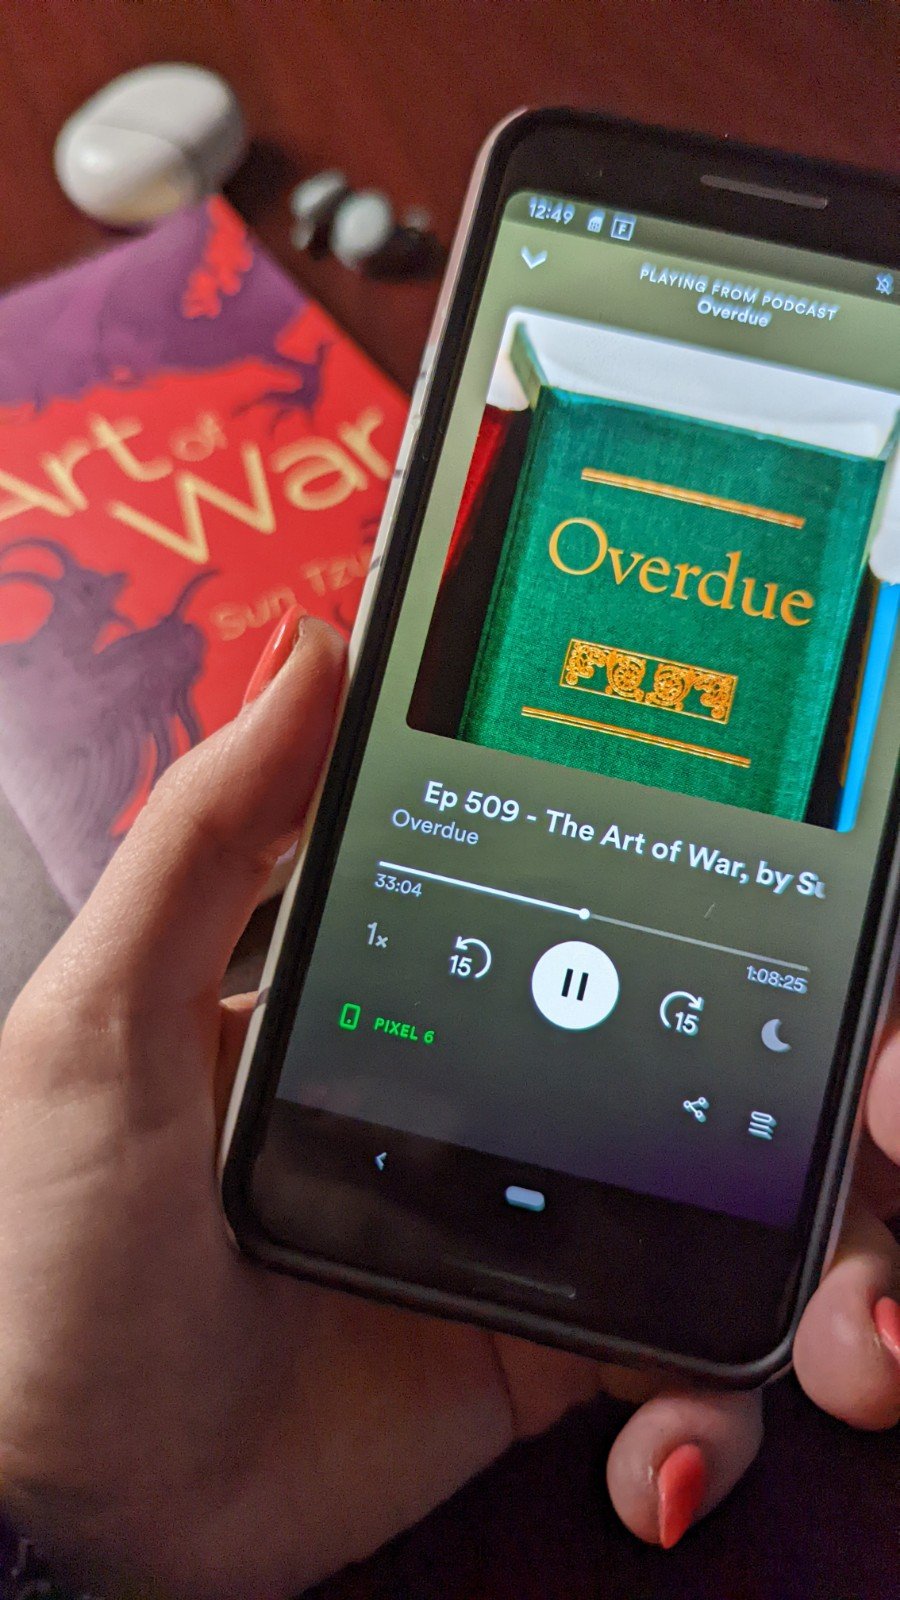 Four Great Literary Podcasts for Avid Readers